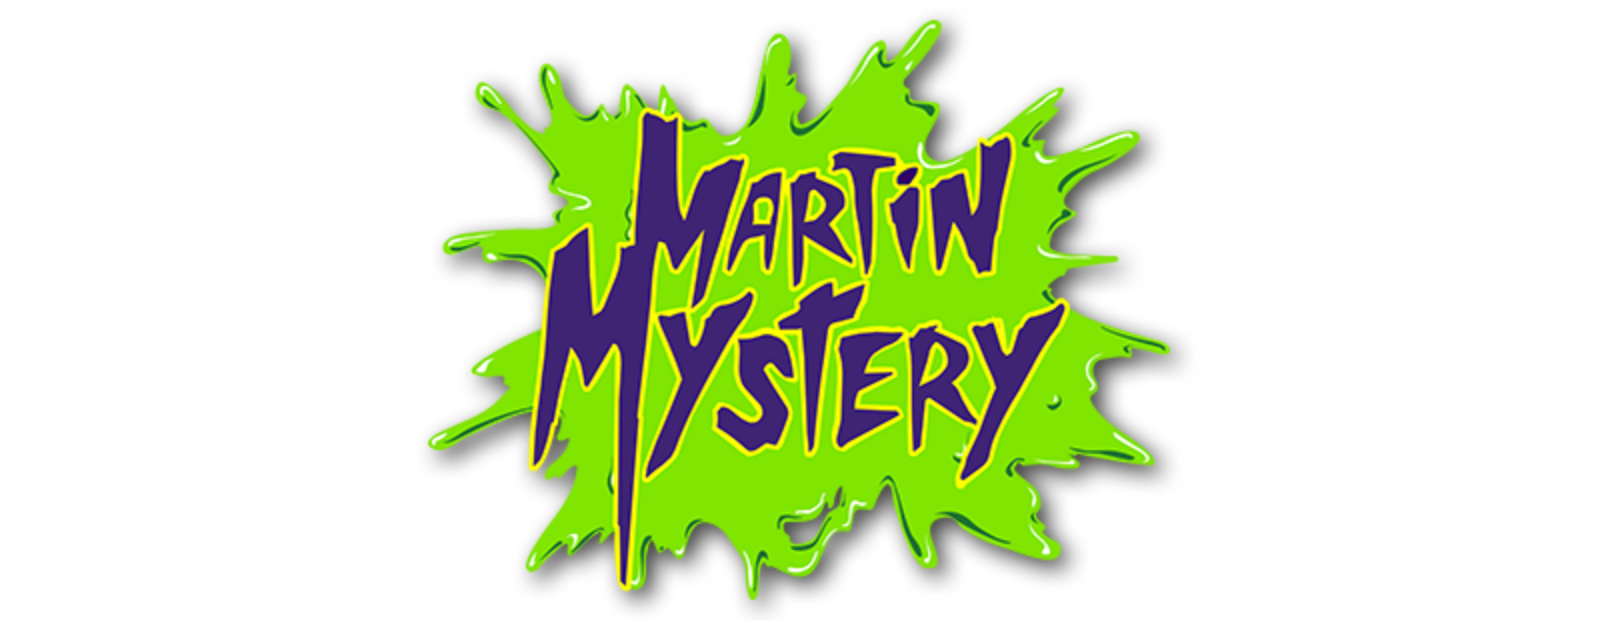 Martin Mystery Volume 1 and 2 